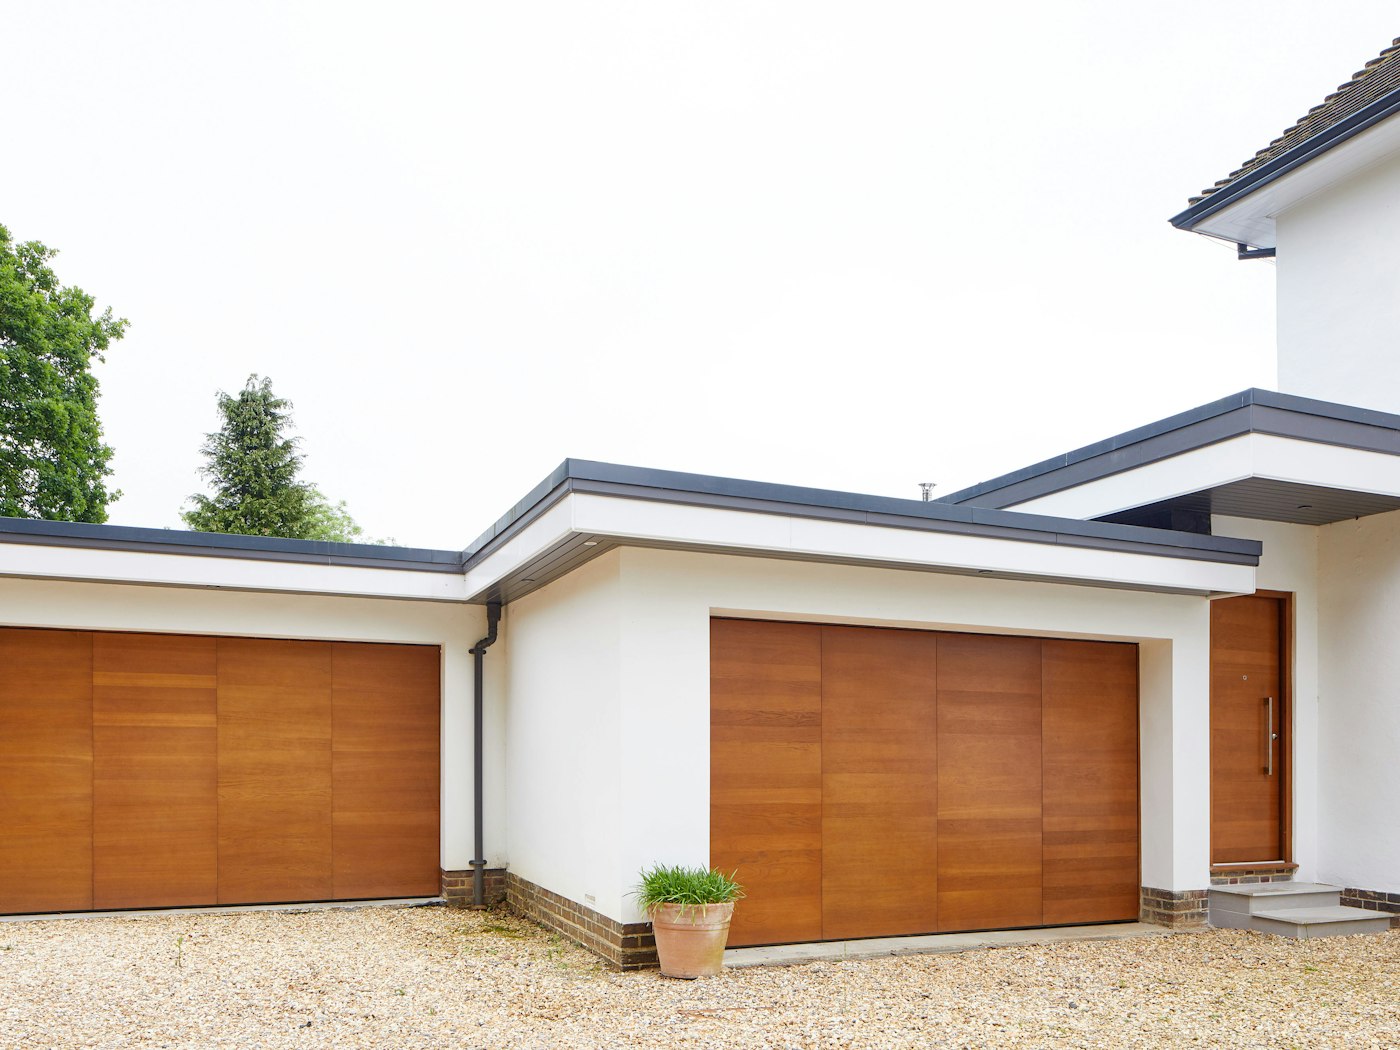 The matching up and over garage doors perfectly complement the traditional house style